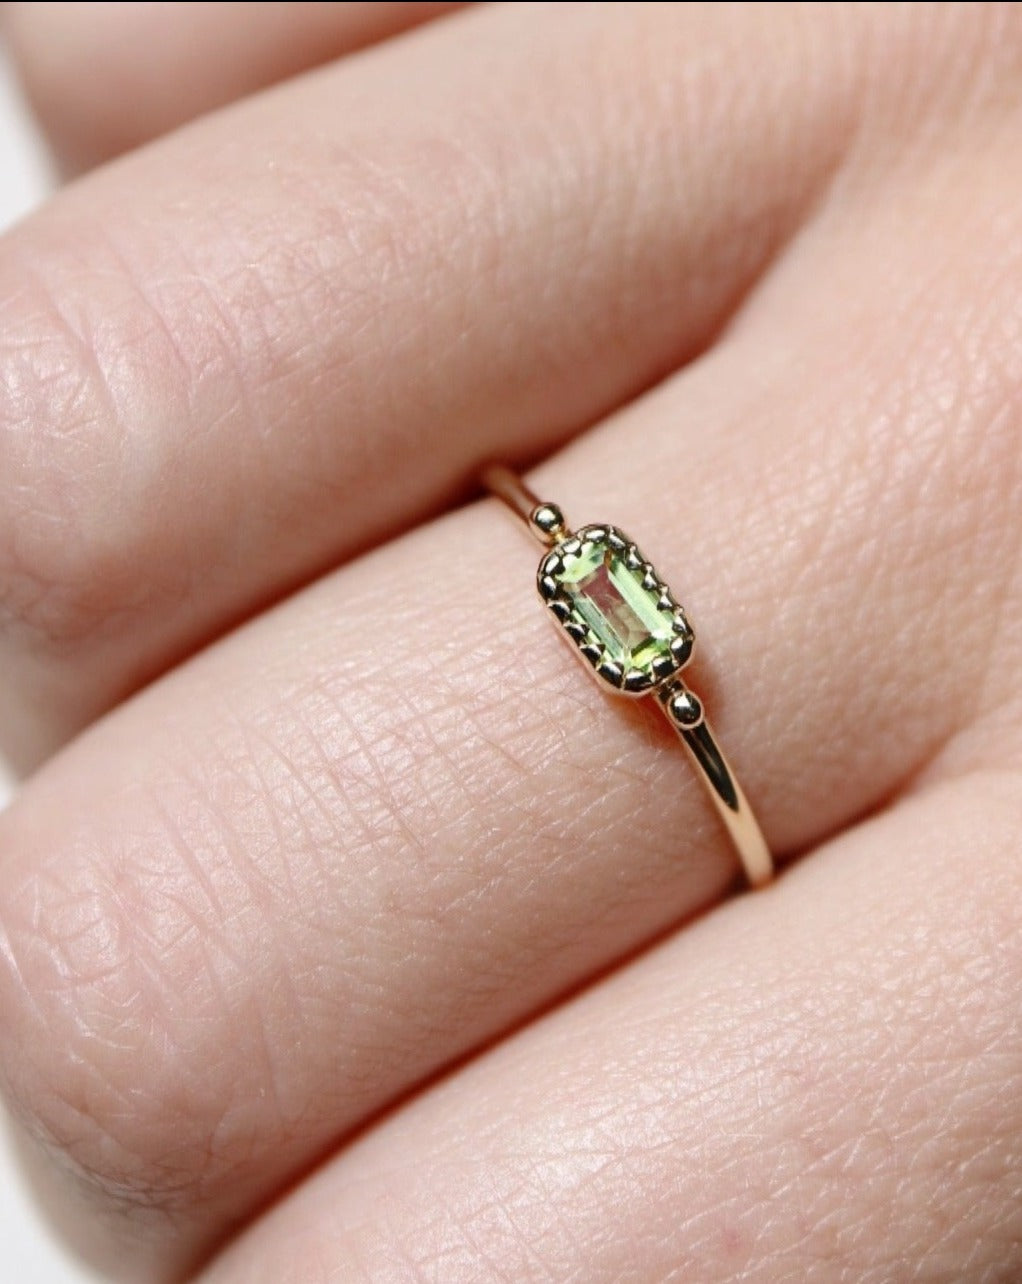 9kt gold Olivine Ring from That's My Story